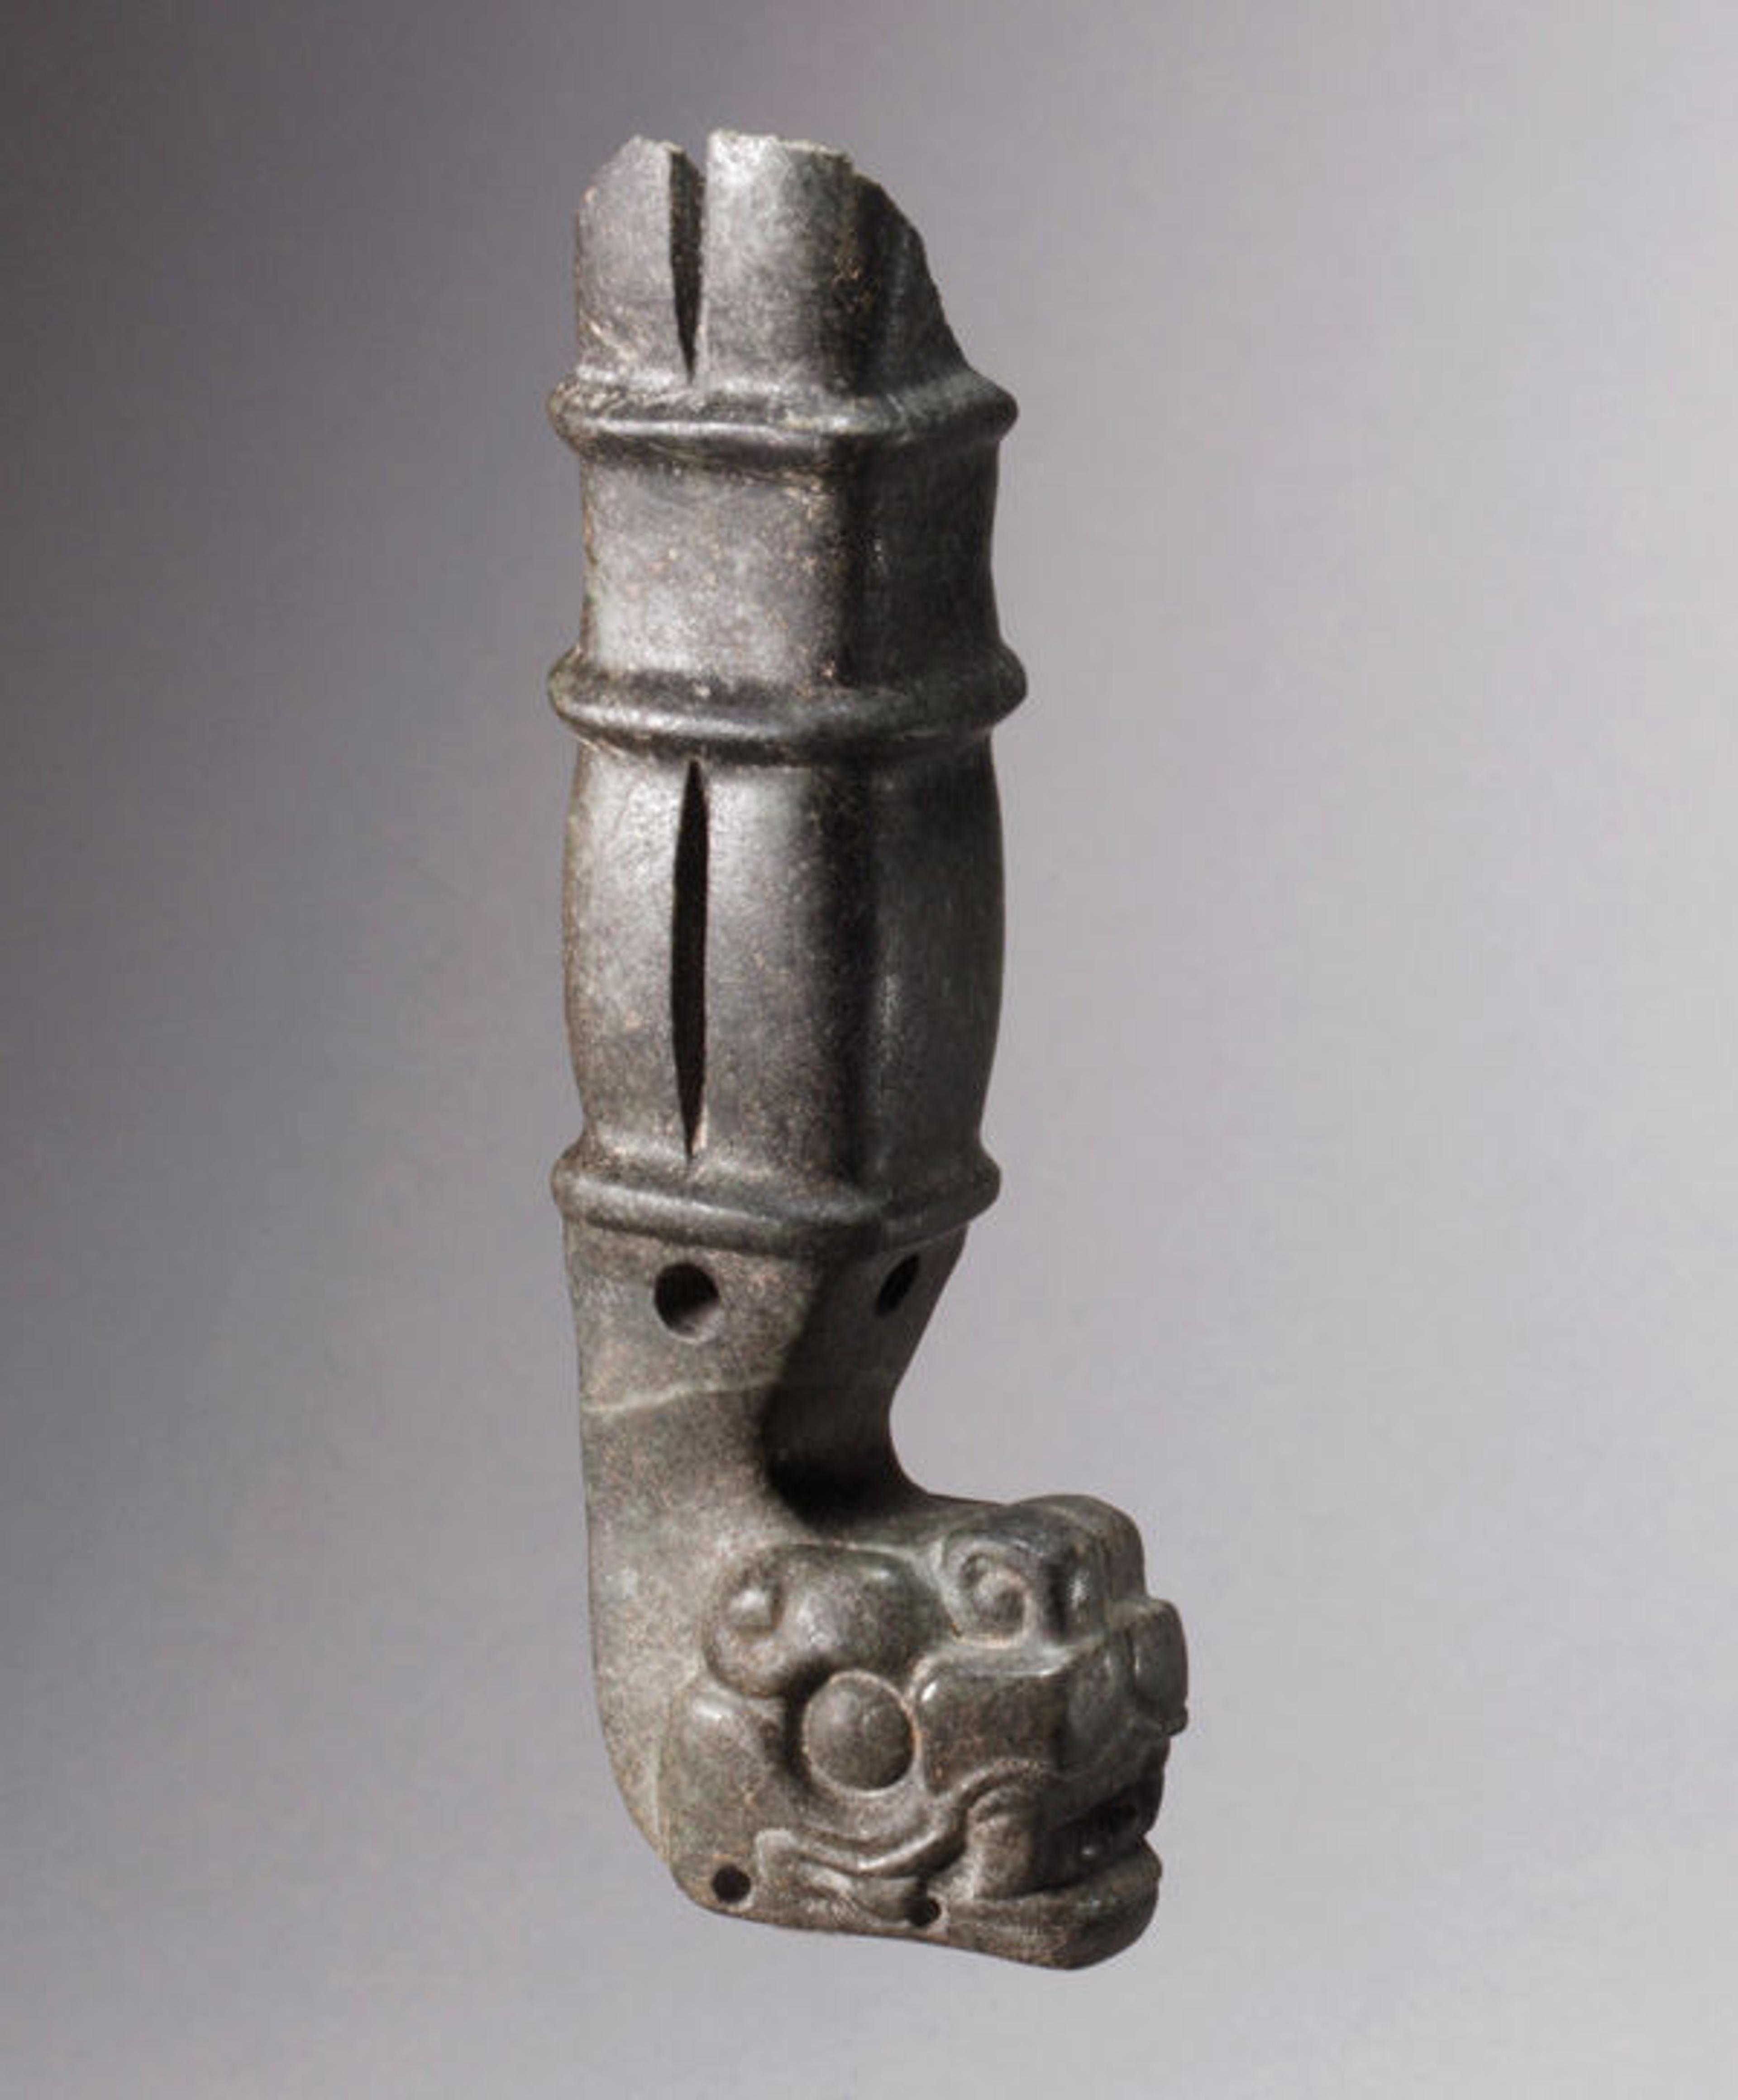 Fig. 1. Ceremonial handle, 7th—9th century. Mexico or Guatemala, Mesoamerica. Maya. Jade (jadeite/omphacite); H. 5 1/2 x 1 1/8 x 1 3/4 in. (14 x 2.8 x 4.5 cm). The Metropolitan Museum of Art, New York, The Michael C. Rockefeller Memorial Collection, Bequest of Nelson A. Rockefeller, 1979 (1979.206.1132)